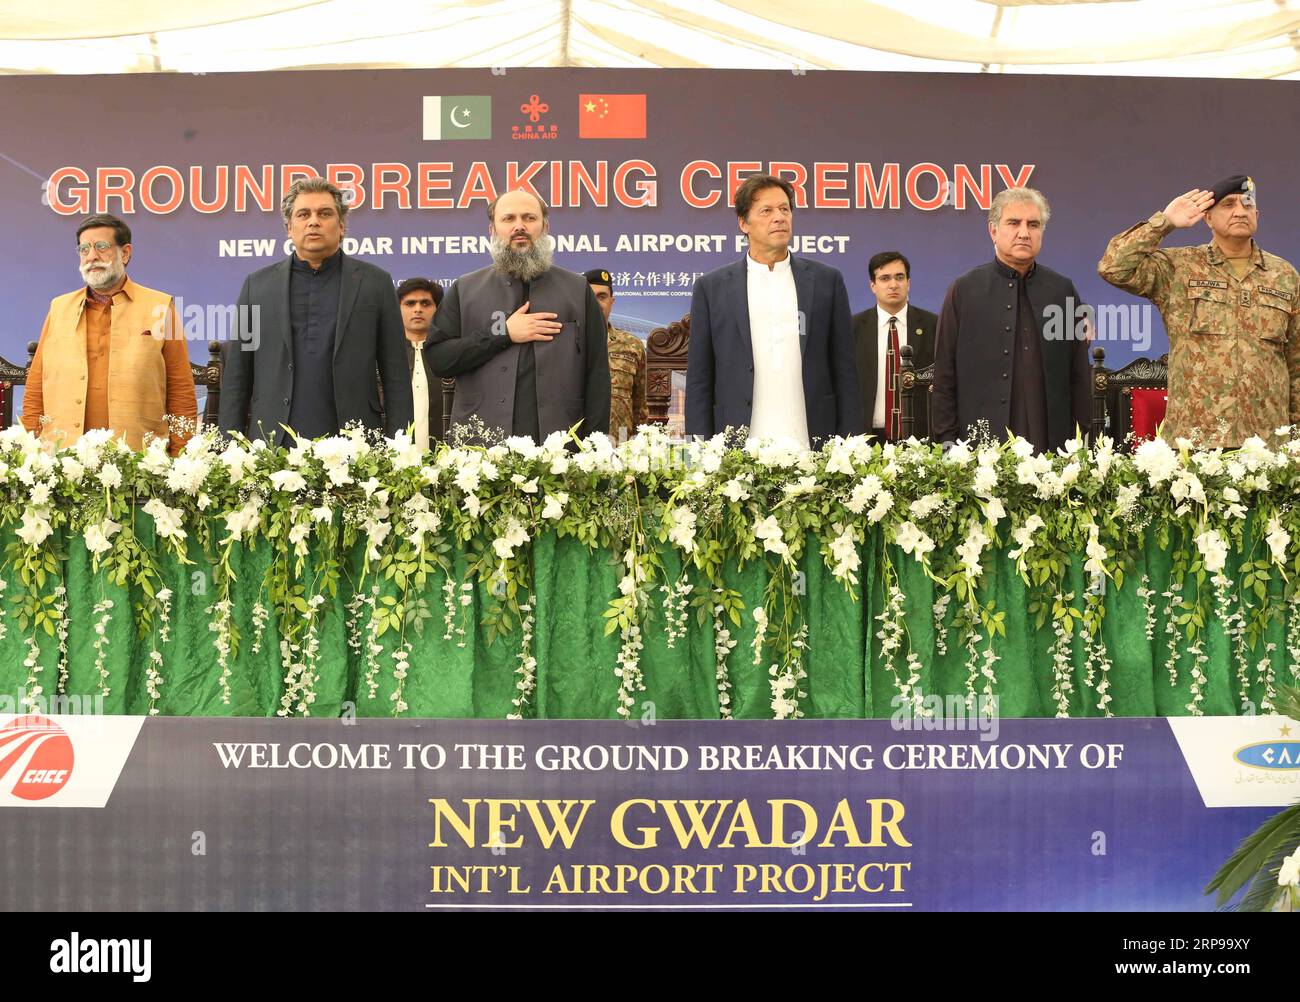 (190330) -- GWADAR, March 30, 2019 (Xinhua) -- Pakistani Prime Minister Imran Khan (3rd R) attends the ground breaking ceremony of the new Gwadar International Airport Project in Gwadar, Pakistan, on March 29, 2019. Pakistan broke ground for the construction of the China-funded new Gwadar International Airport on Friday, which would link Pakistan s fast-rising southwest Gwadar port city with the rest of the world. (Xinhua/Liu Tian) PAKISTAN-GWADAR-AIRPORT-GROUND BREAKING CEREMONY PUBLICATIONxNOTxINxCHN Stock Photo